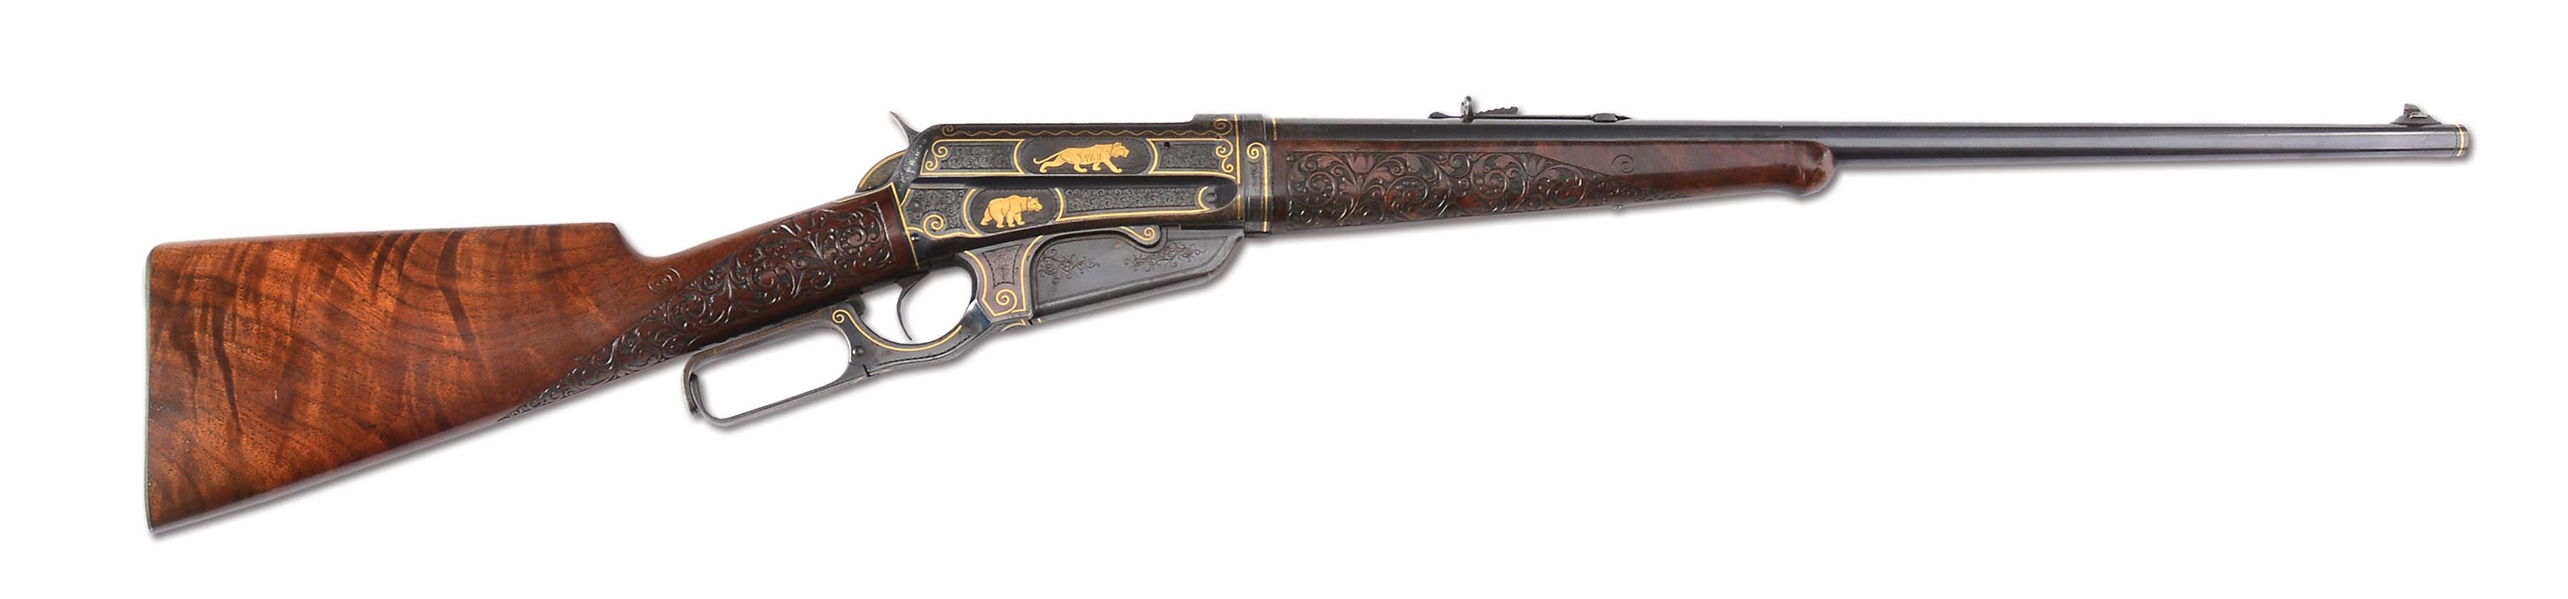 (C) OUTSTANDING GRADE I WINCHESTER 1895 EMBELLISHED BY JOHN ULRICH.